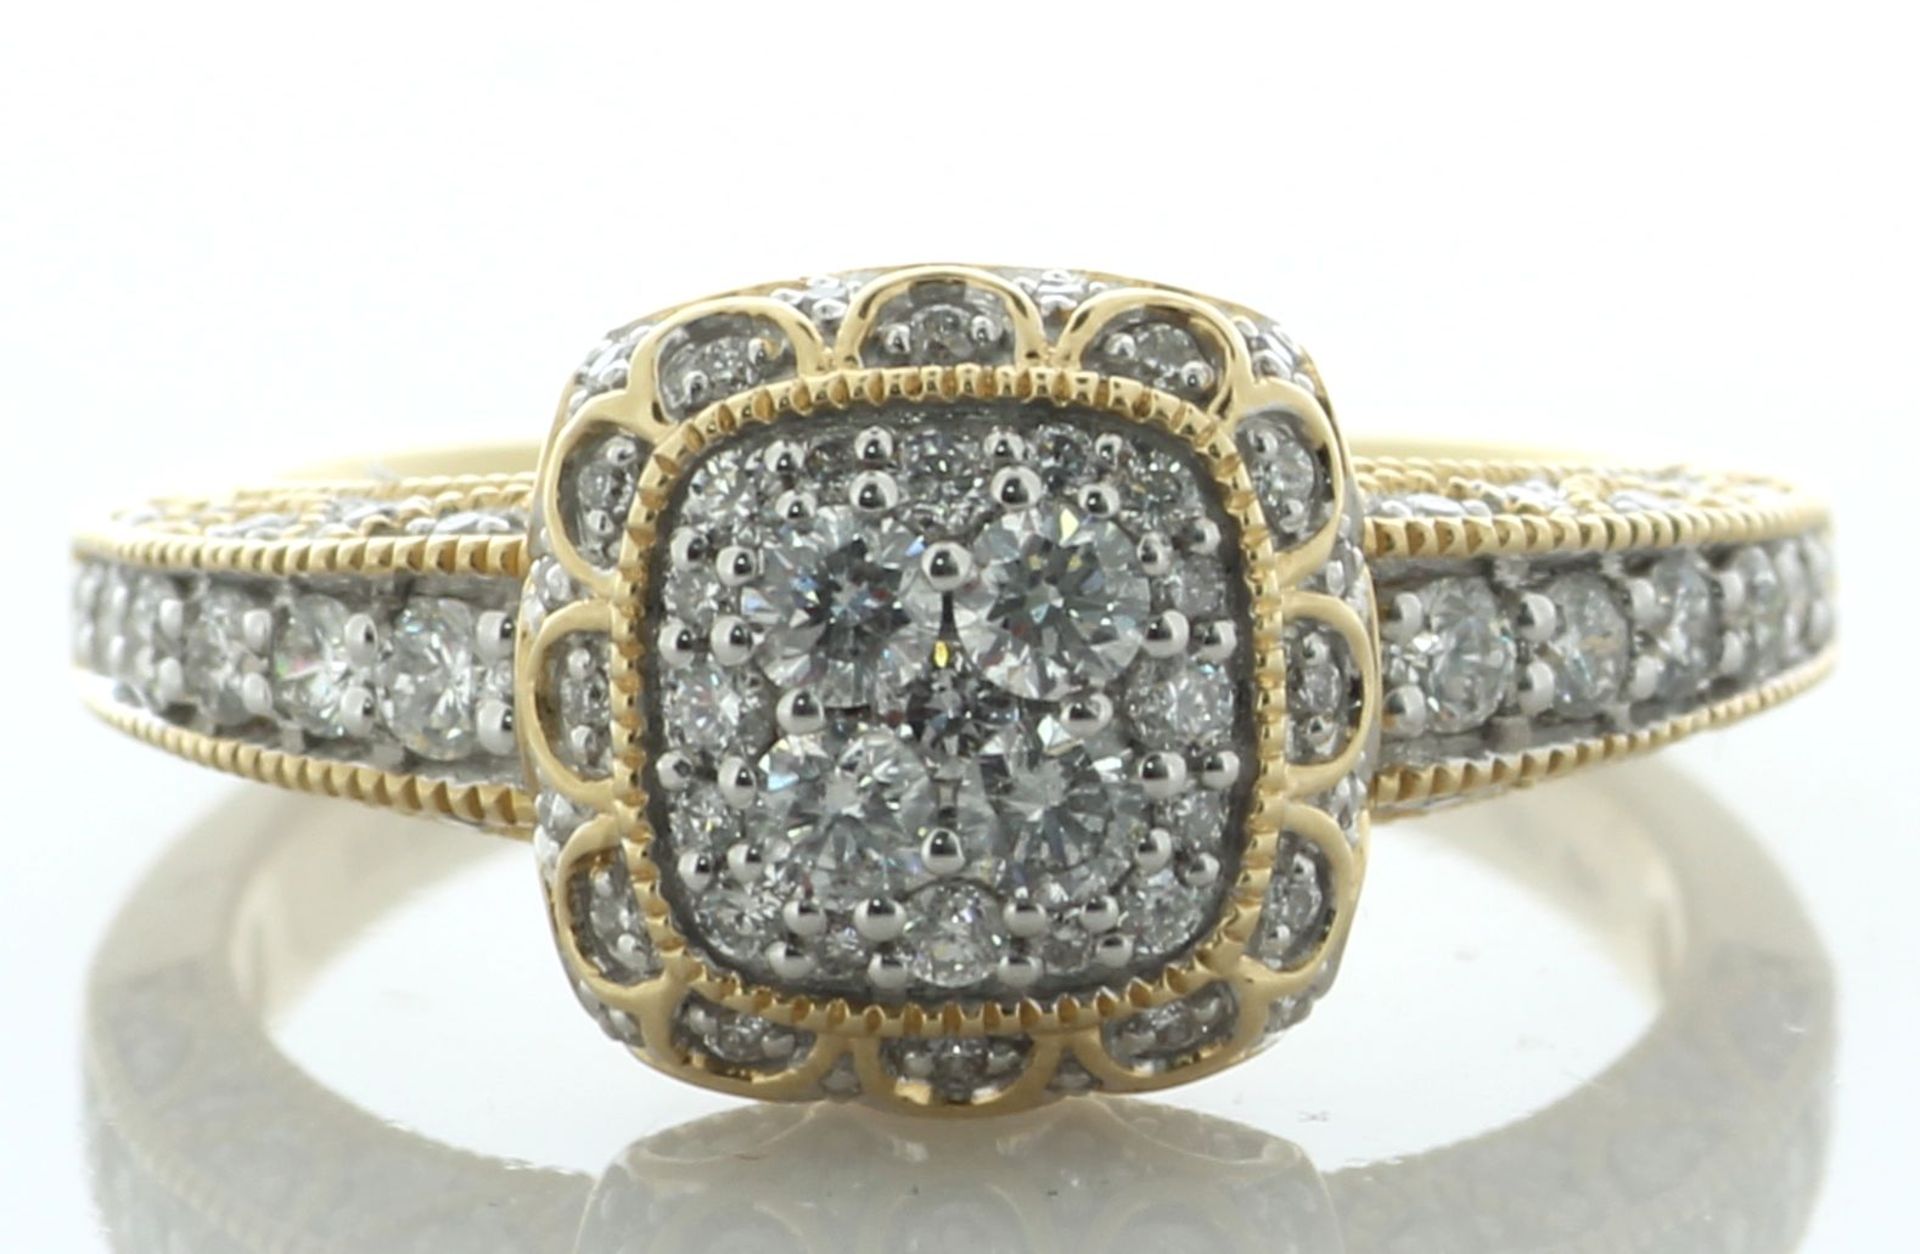 14ct Yellow Gold Cushion Shaped Cluster Diamond Ring 1.00 Carats - Valued By IDI £4,770.00 - This